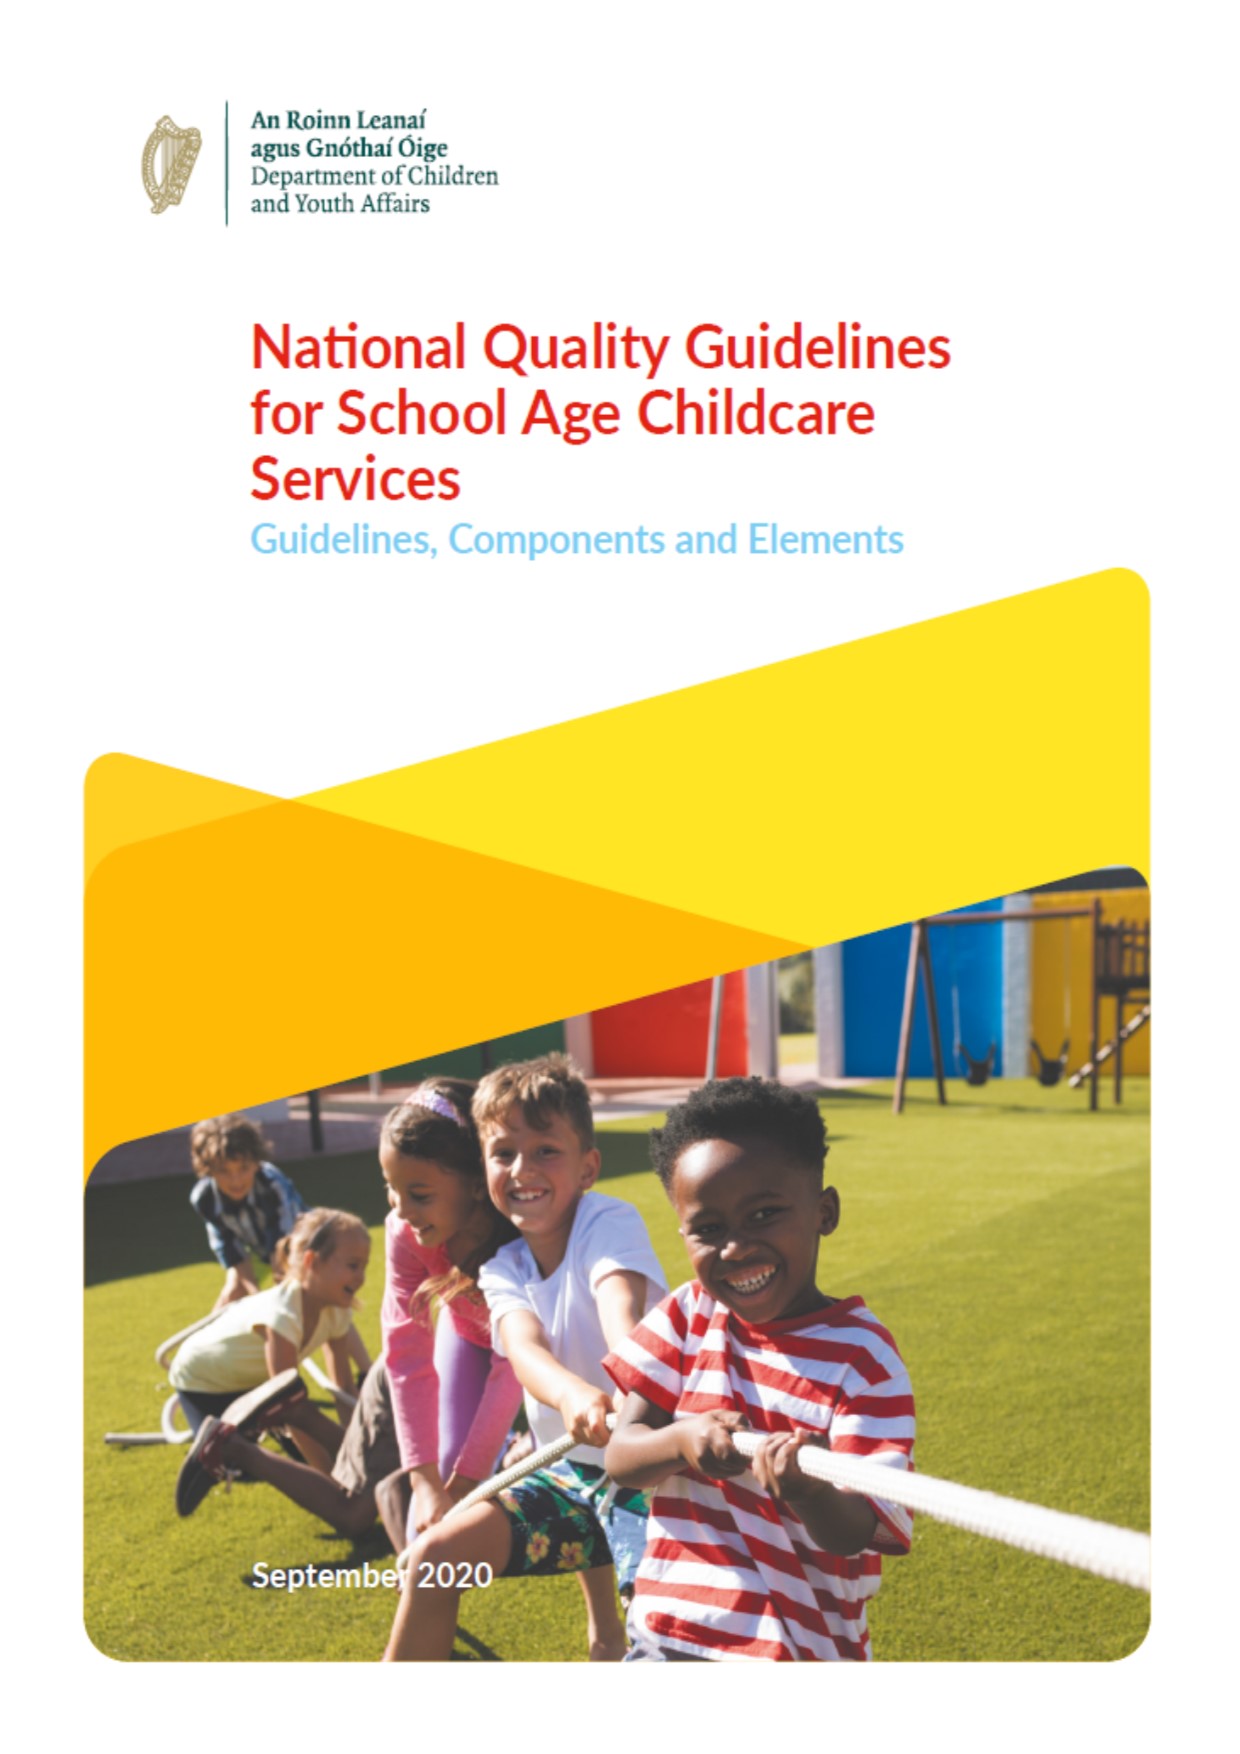 National Quality Guidelines for School Age Childcare Services